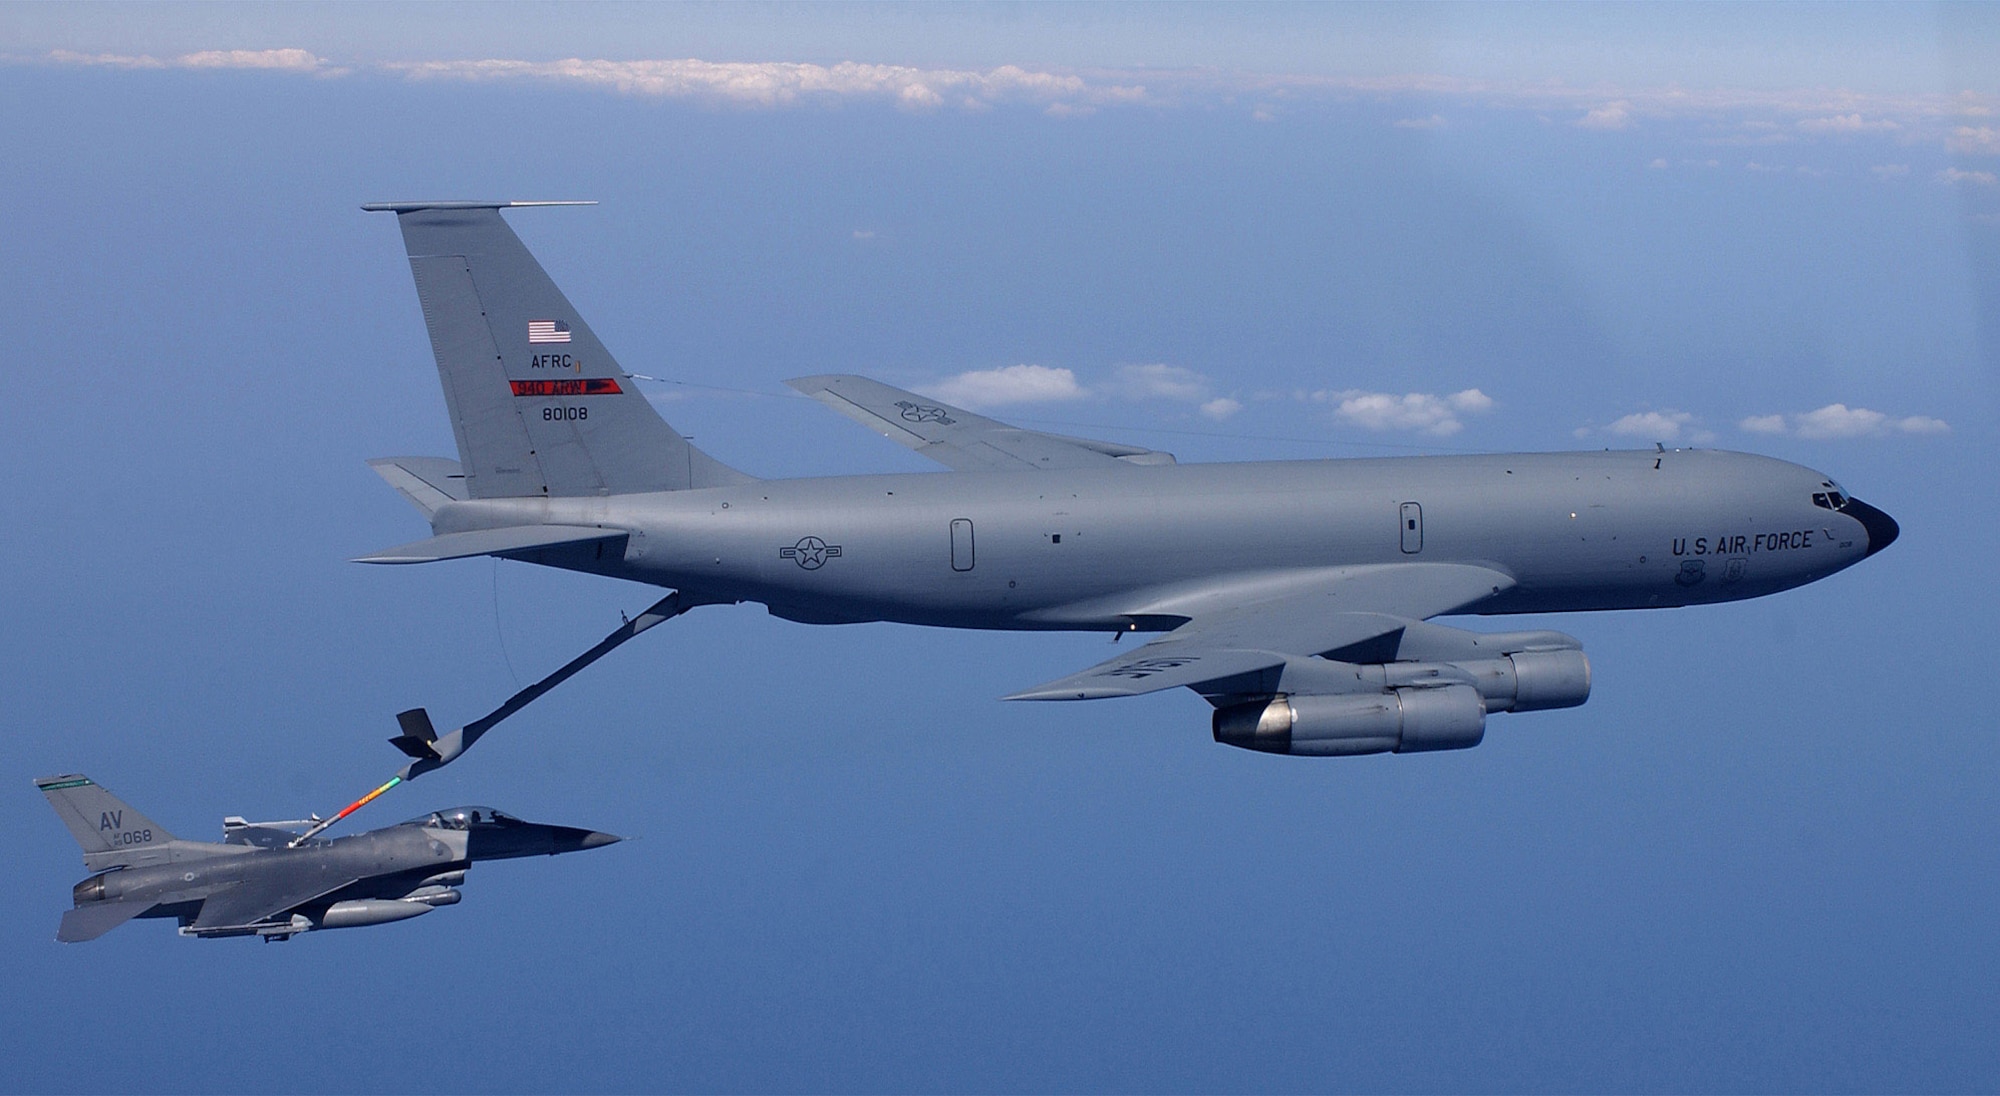 FILE PHOTO -- A KC-135 Stratotanker refuels an F-16 Fighting Falcon.  Air Force Secretary Dr. James G. Roche concluded testimony before the Senate Armed Services Committee on Sept. 4.  He answered questions about the 2004 Air Force Tanker Lease Proposal, which would replace ageing KC-135s with leased KC-767s.  (U.S. Air Force photo by Tech. Sgt. Mike Buytas)